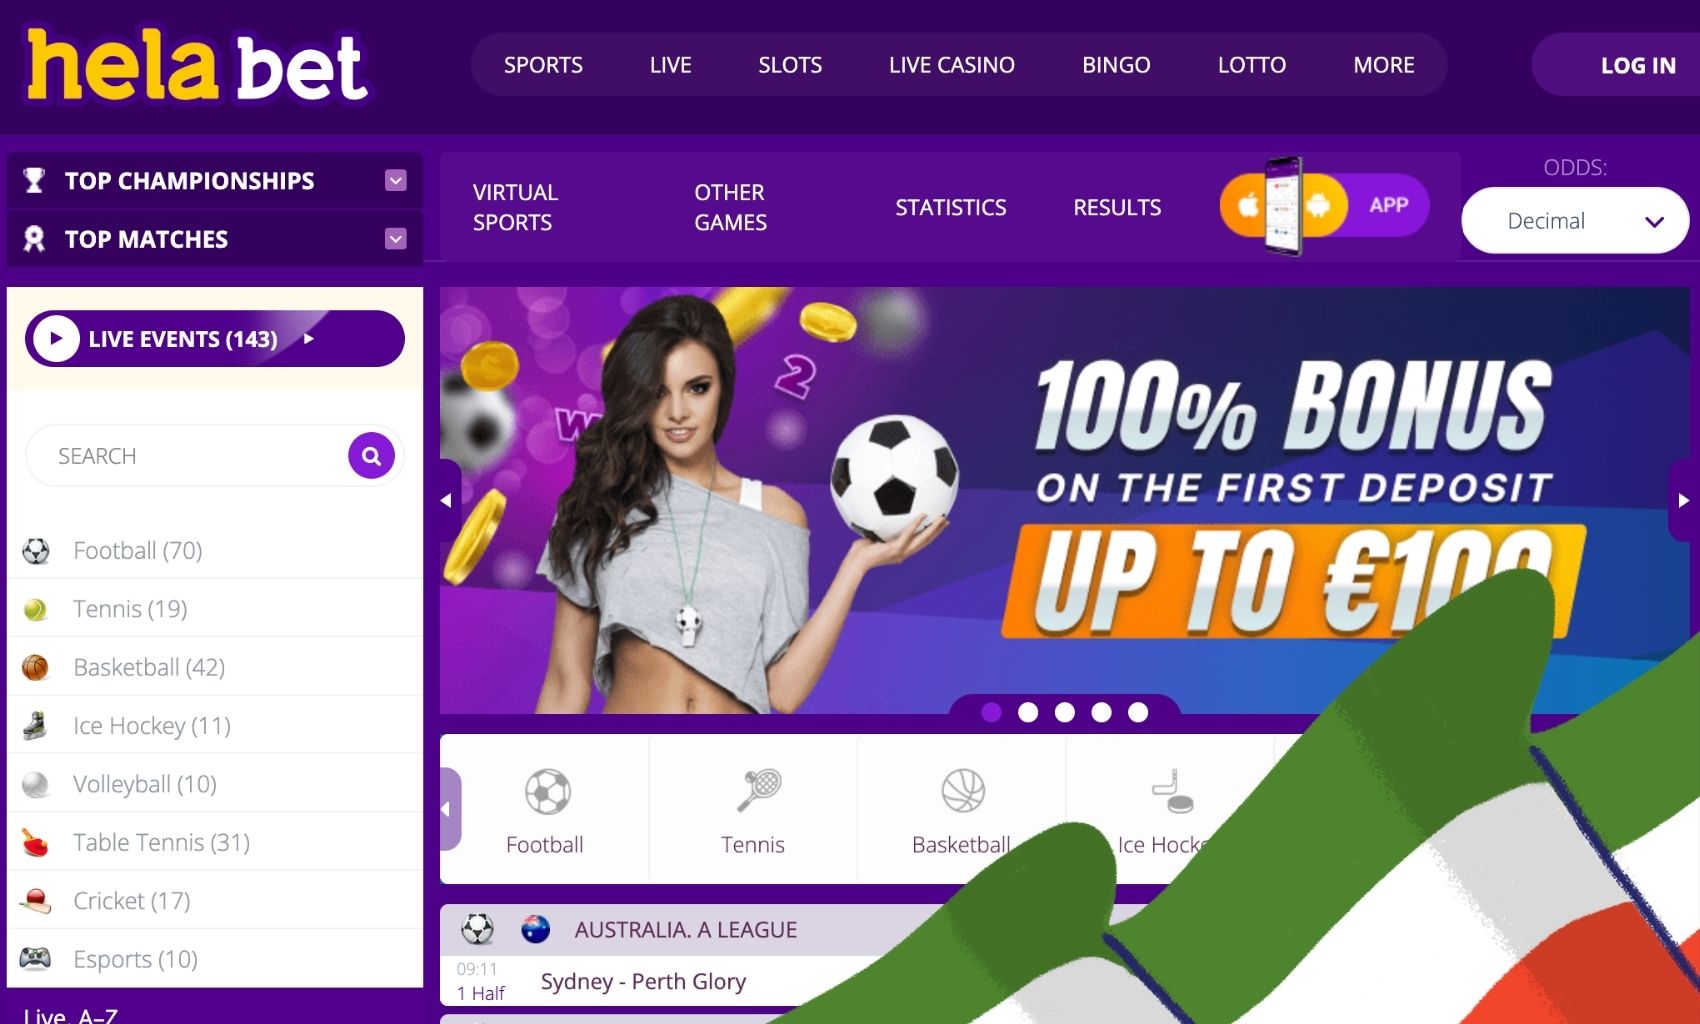 How Is Helabet Different From Other Online Betting Platforms?